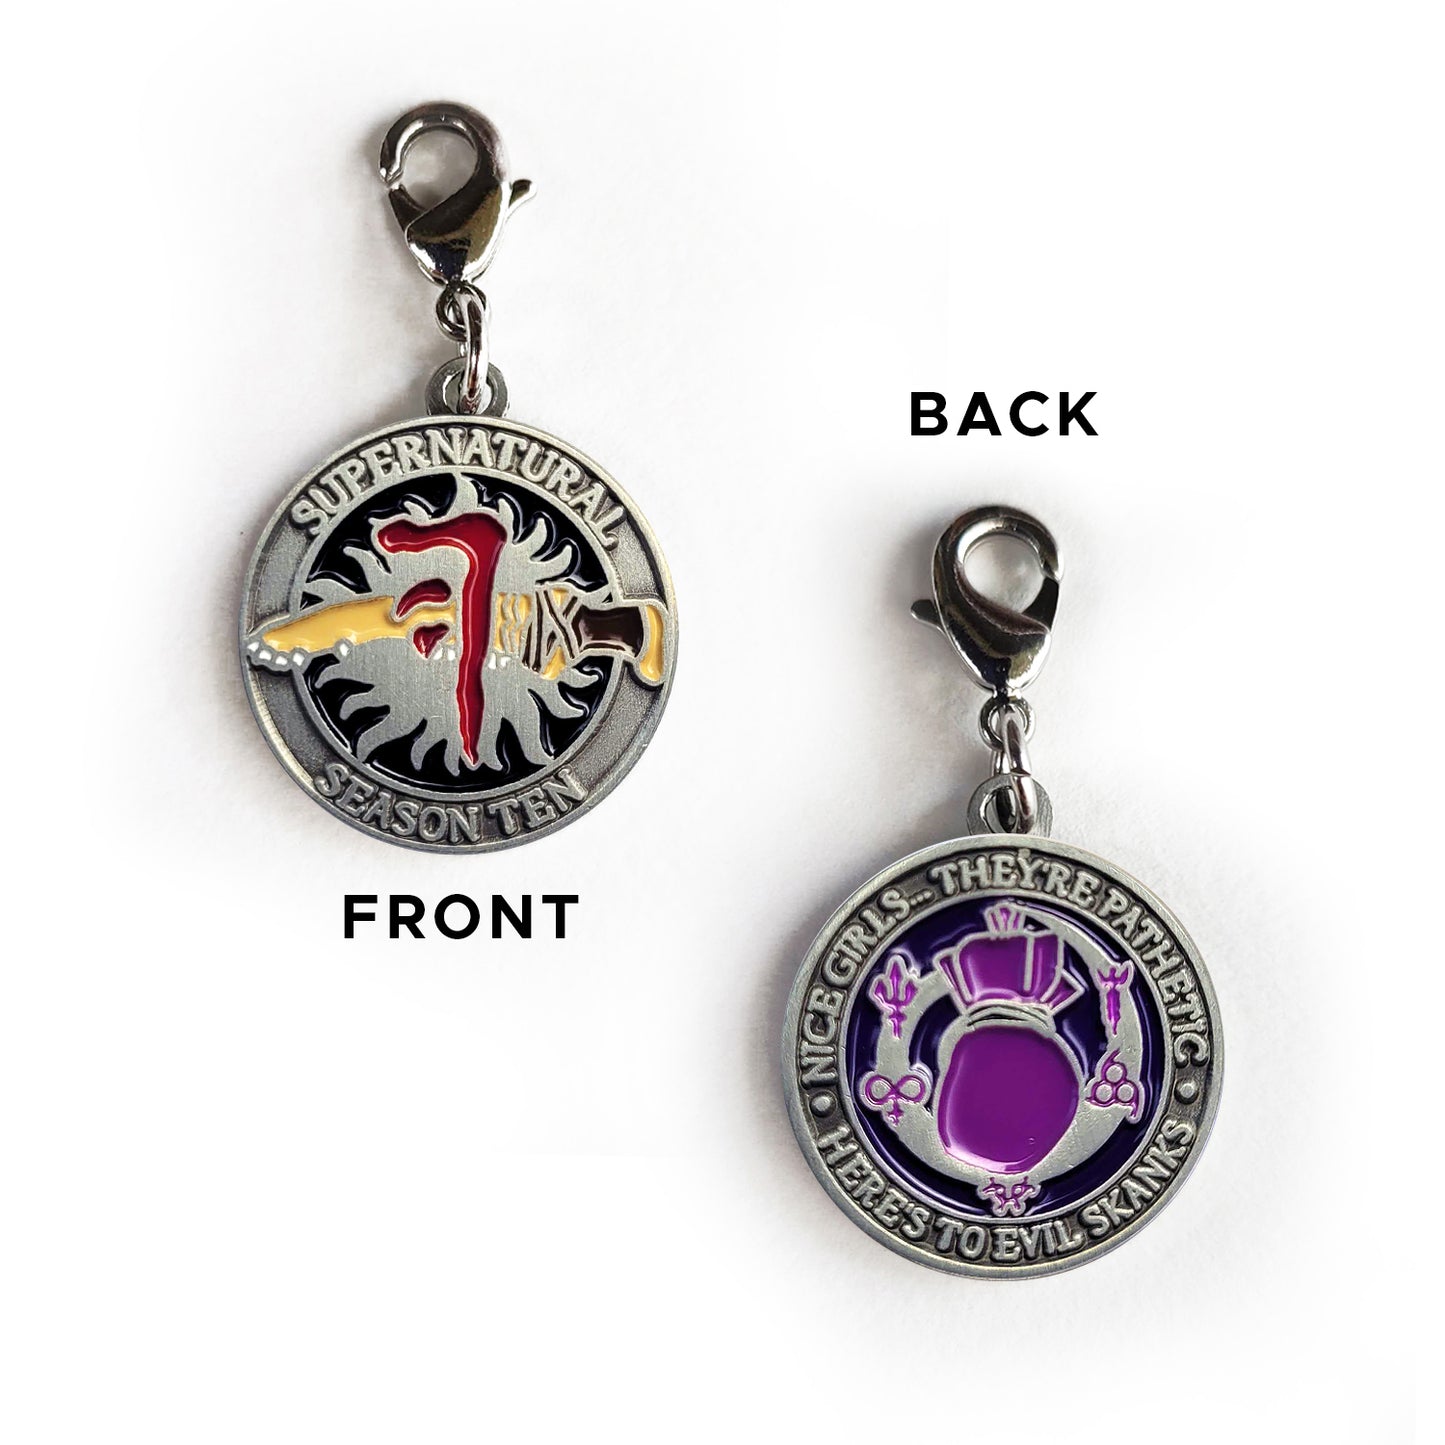 A brass coin with "Supernatural season ten”, The front has a black background, and the anti-possession symbol with a knife piercing it, with the Mark of Cain on top. The back has “Nice’ girls… they’re pathetic. Here’s to evil skanks” printed around the edge.”, and a purple spell bag with spell symbols surrounding it.